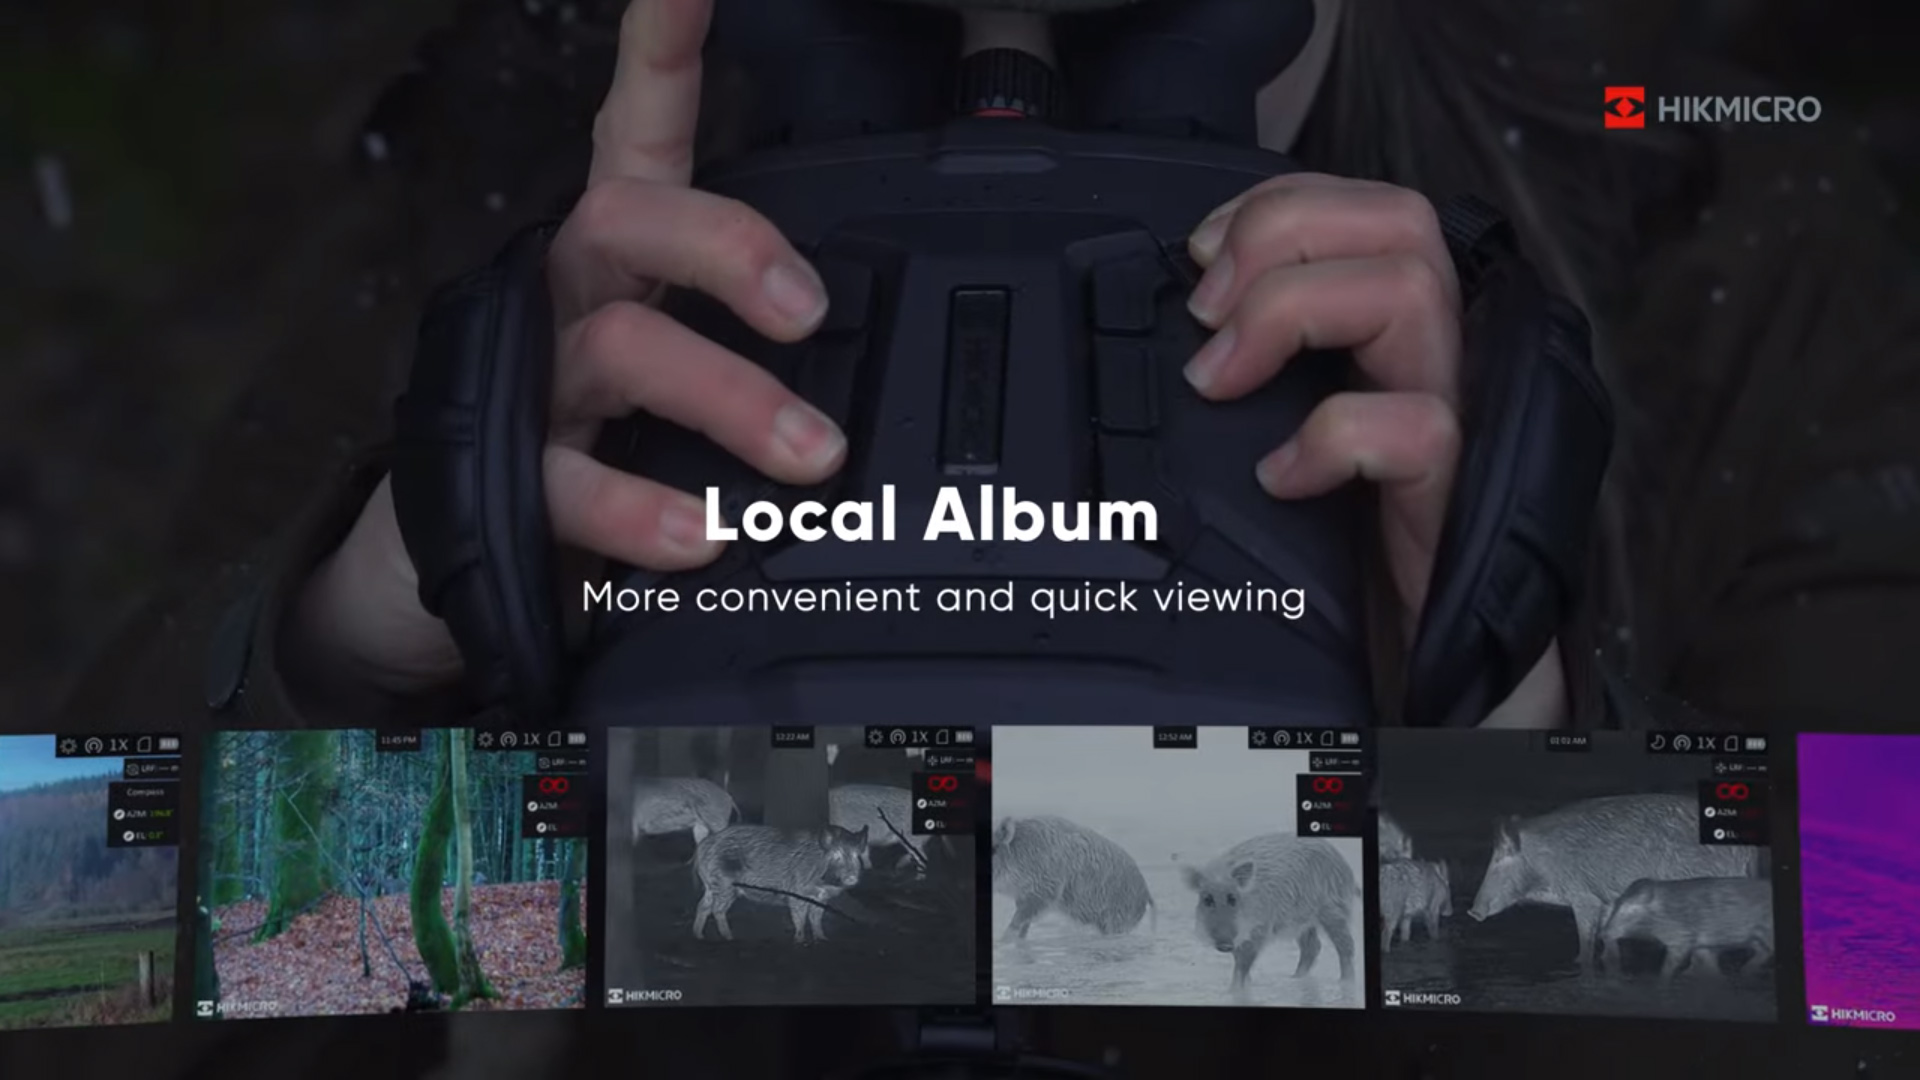 The local album on the camera where your images or videos can be conveniently and quickly viewed.